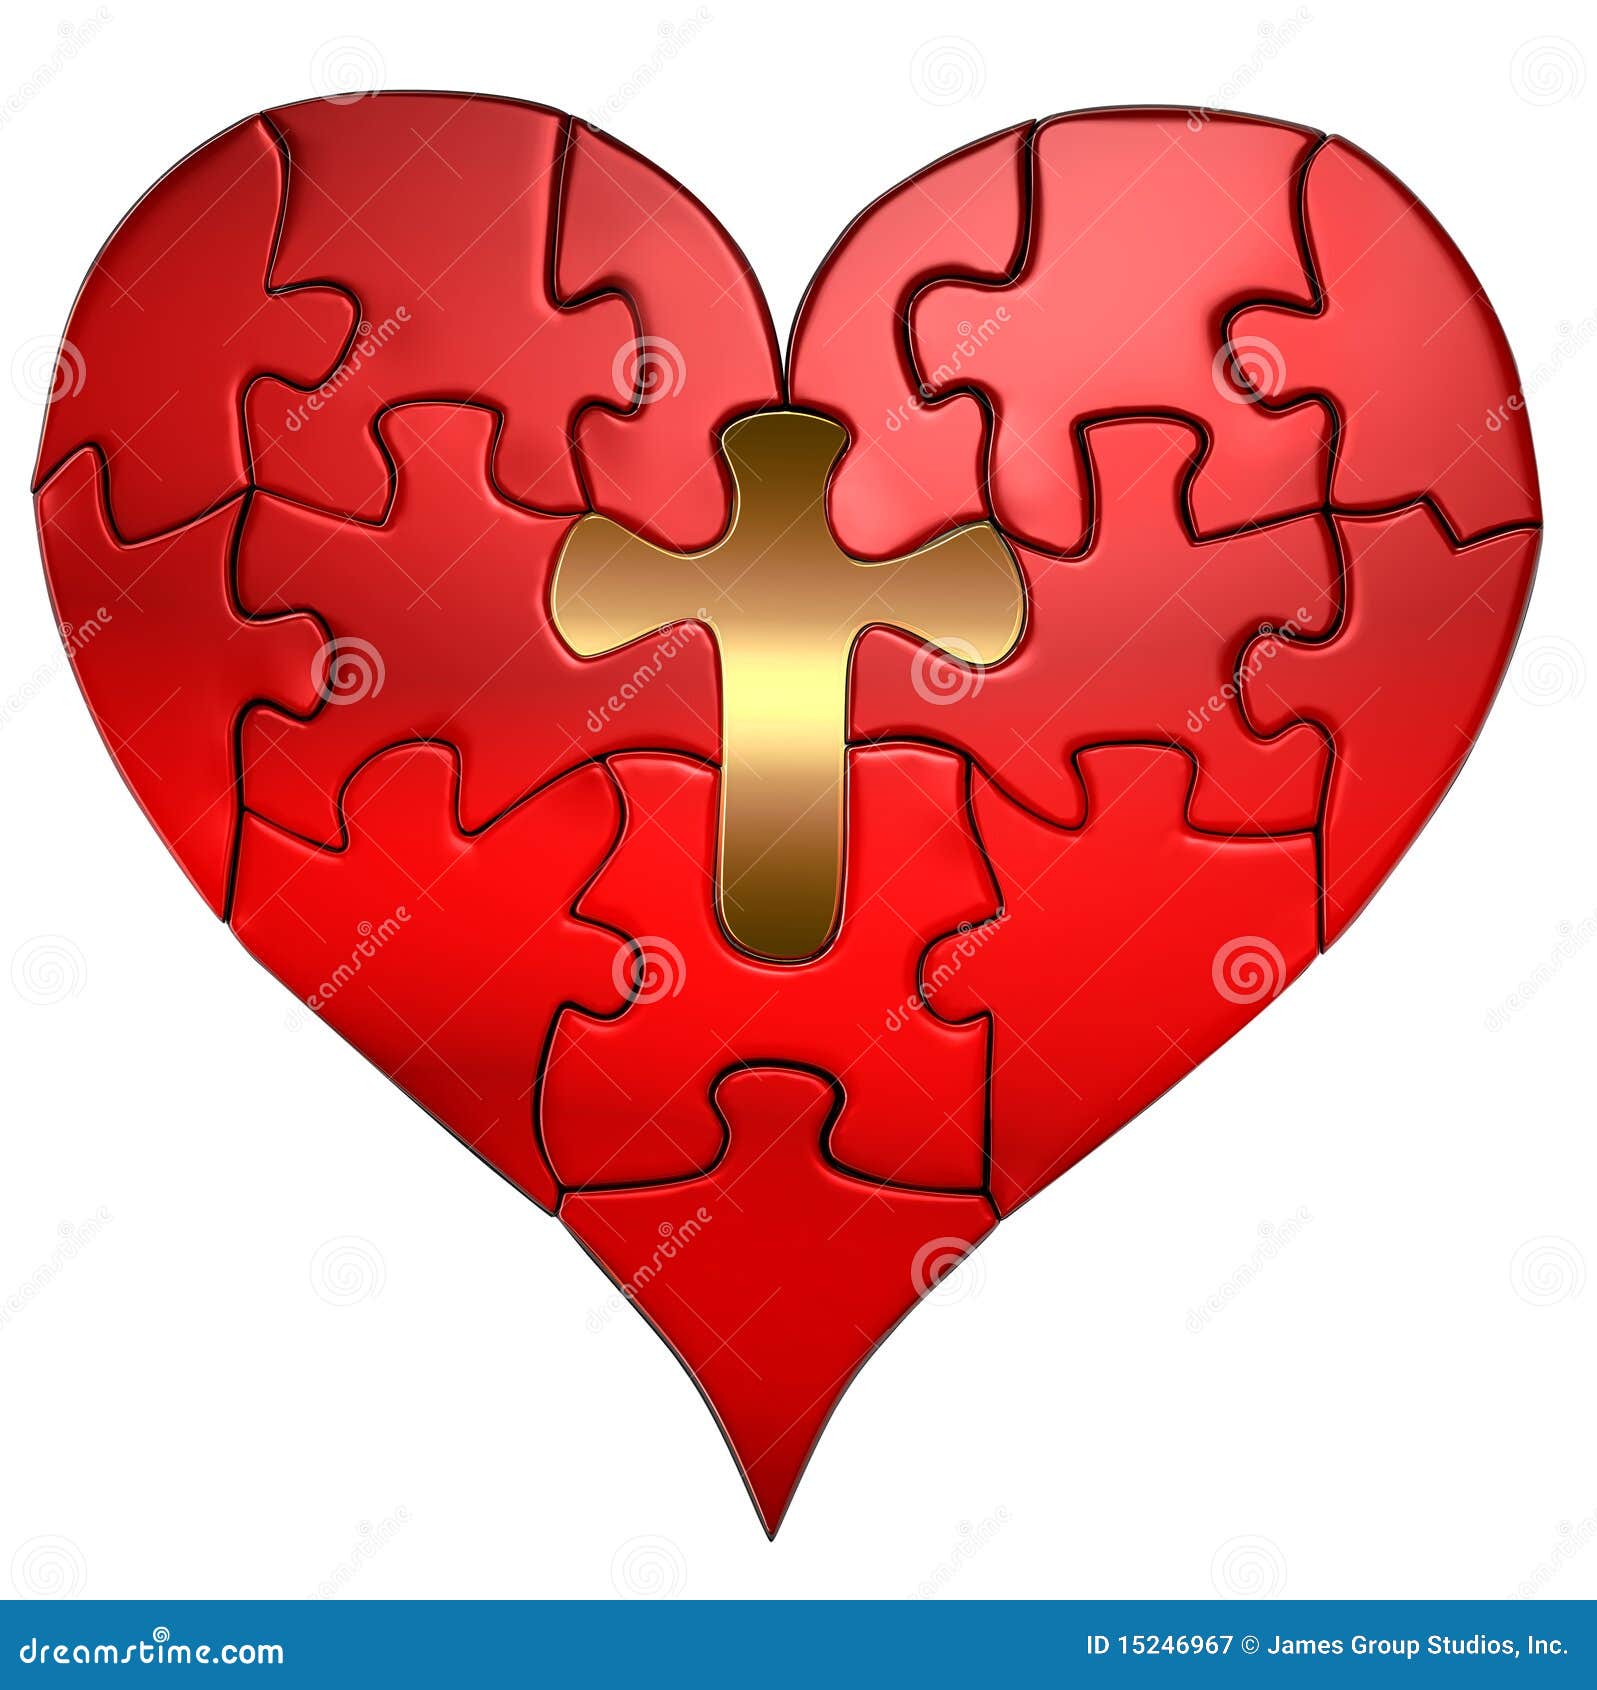 free cross and heart clipart - photo #33